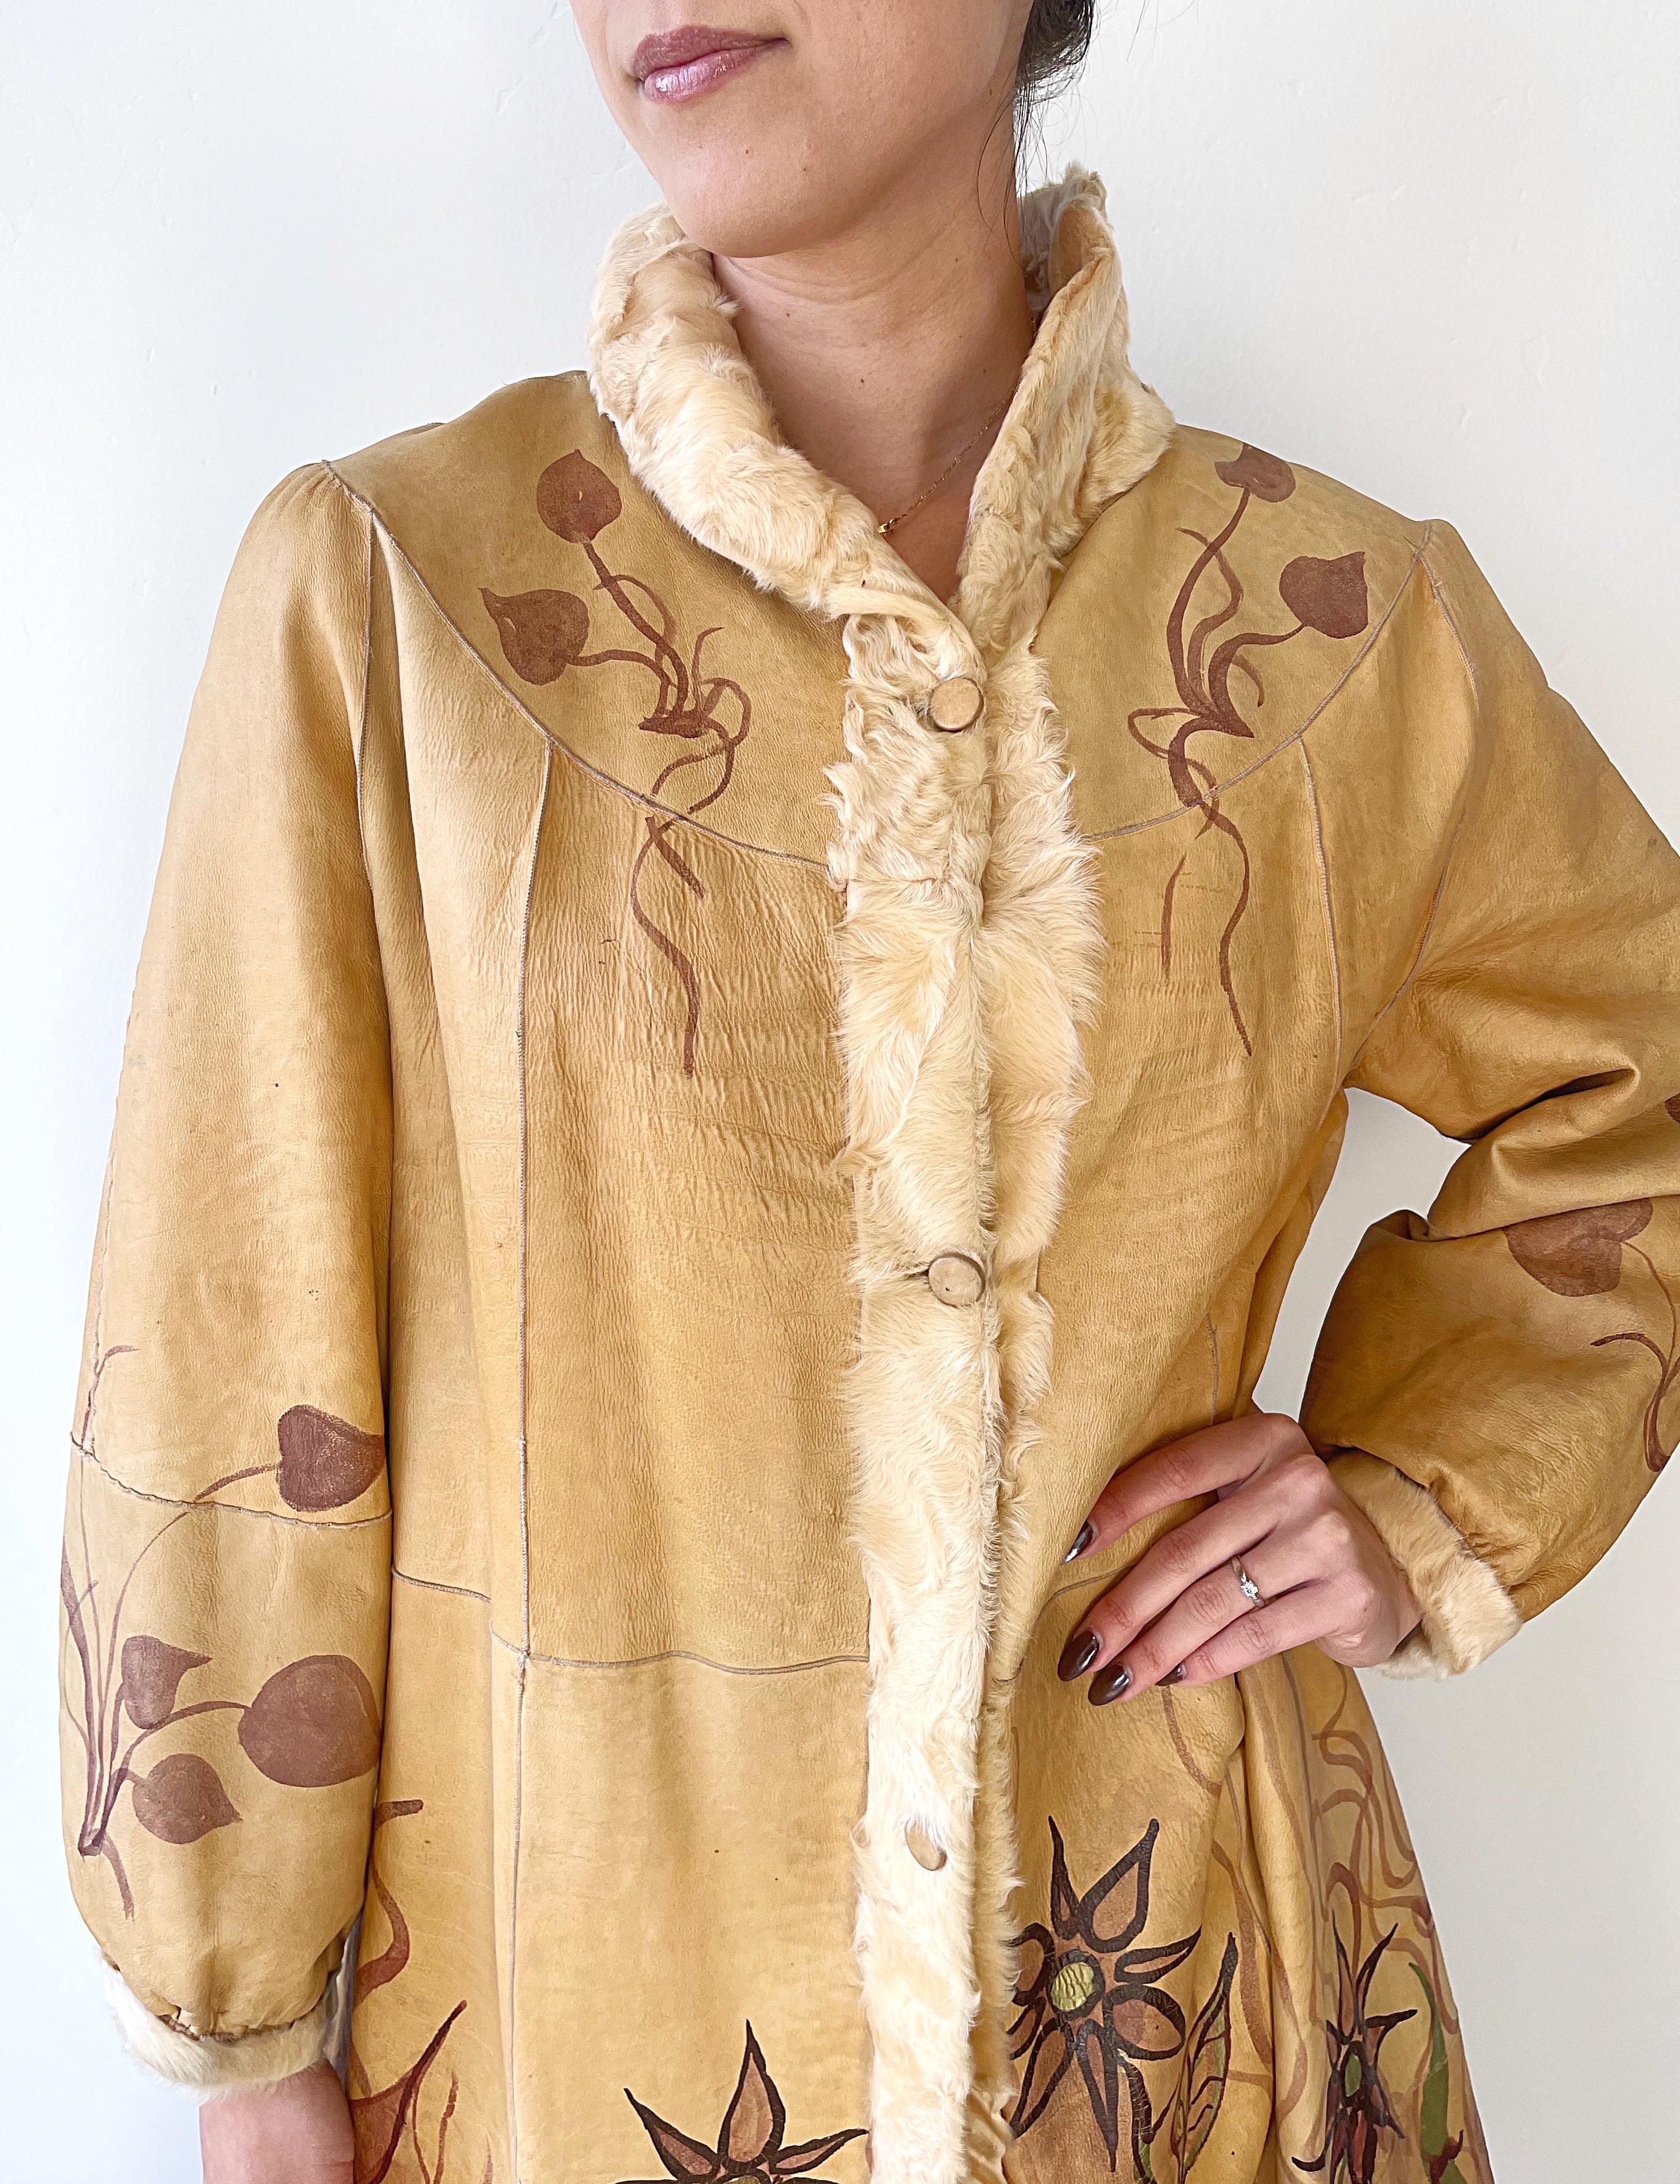 Amazing Late 1970s Hand Painted Leather Shearling Lined 70s Vintage Jacket Coat For Sale 7